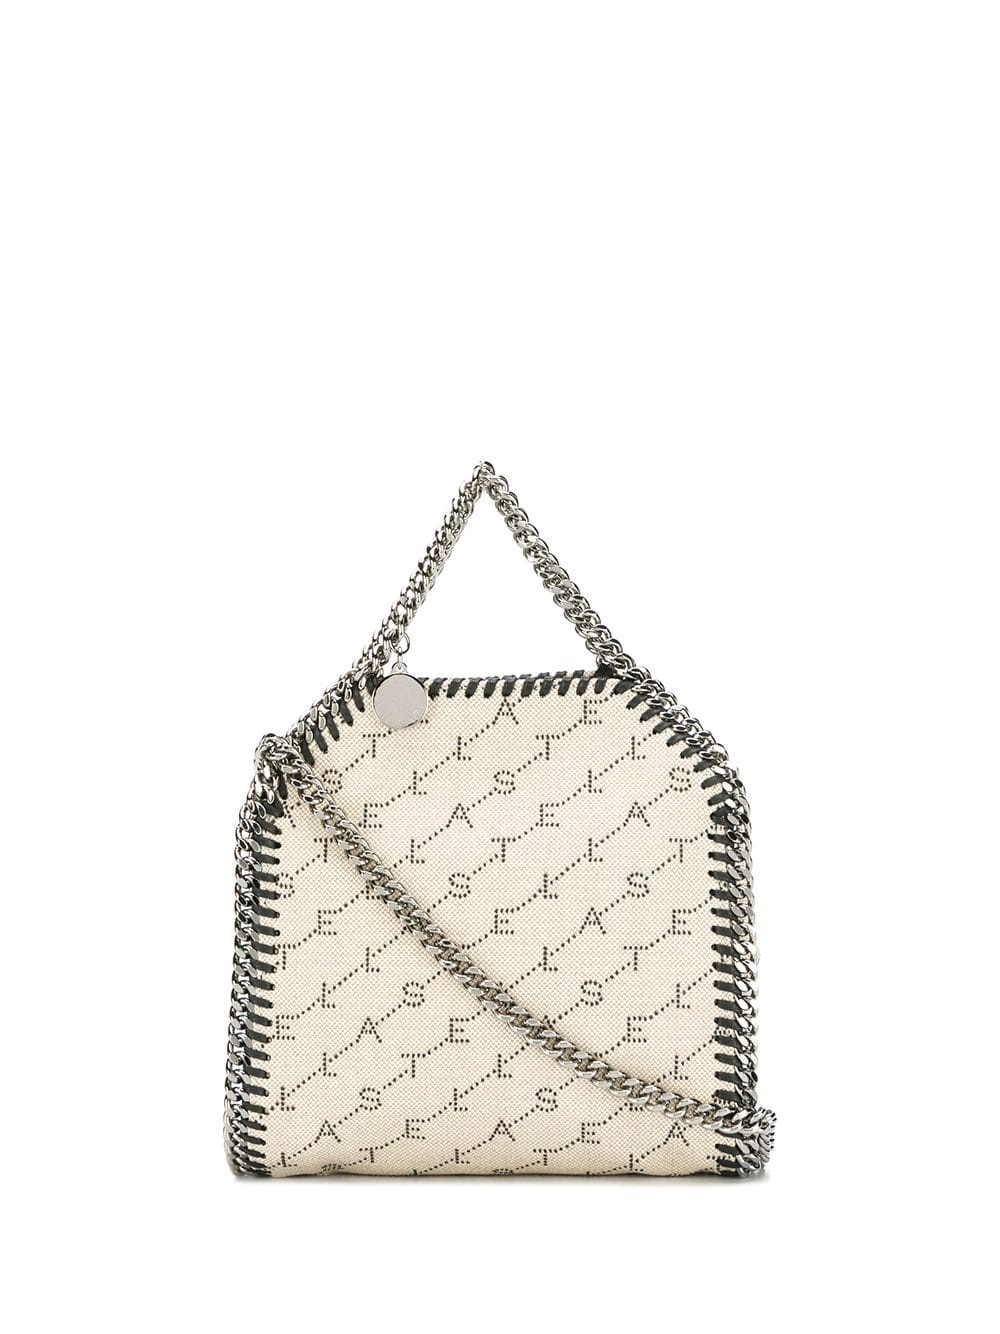 stella mccartney TINY FALABELLA BAG available on montiboutique.com 